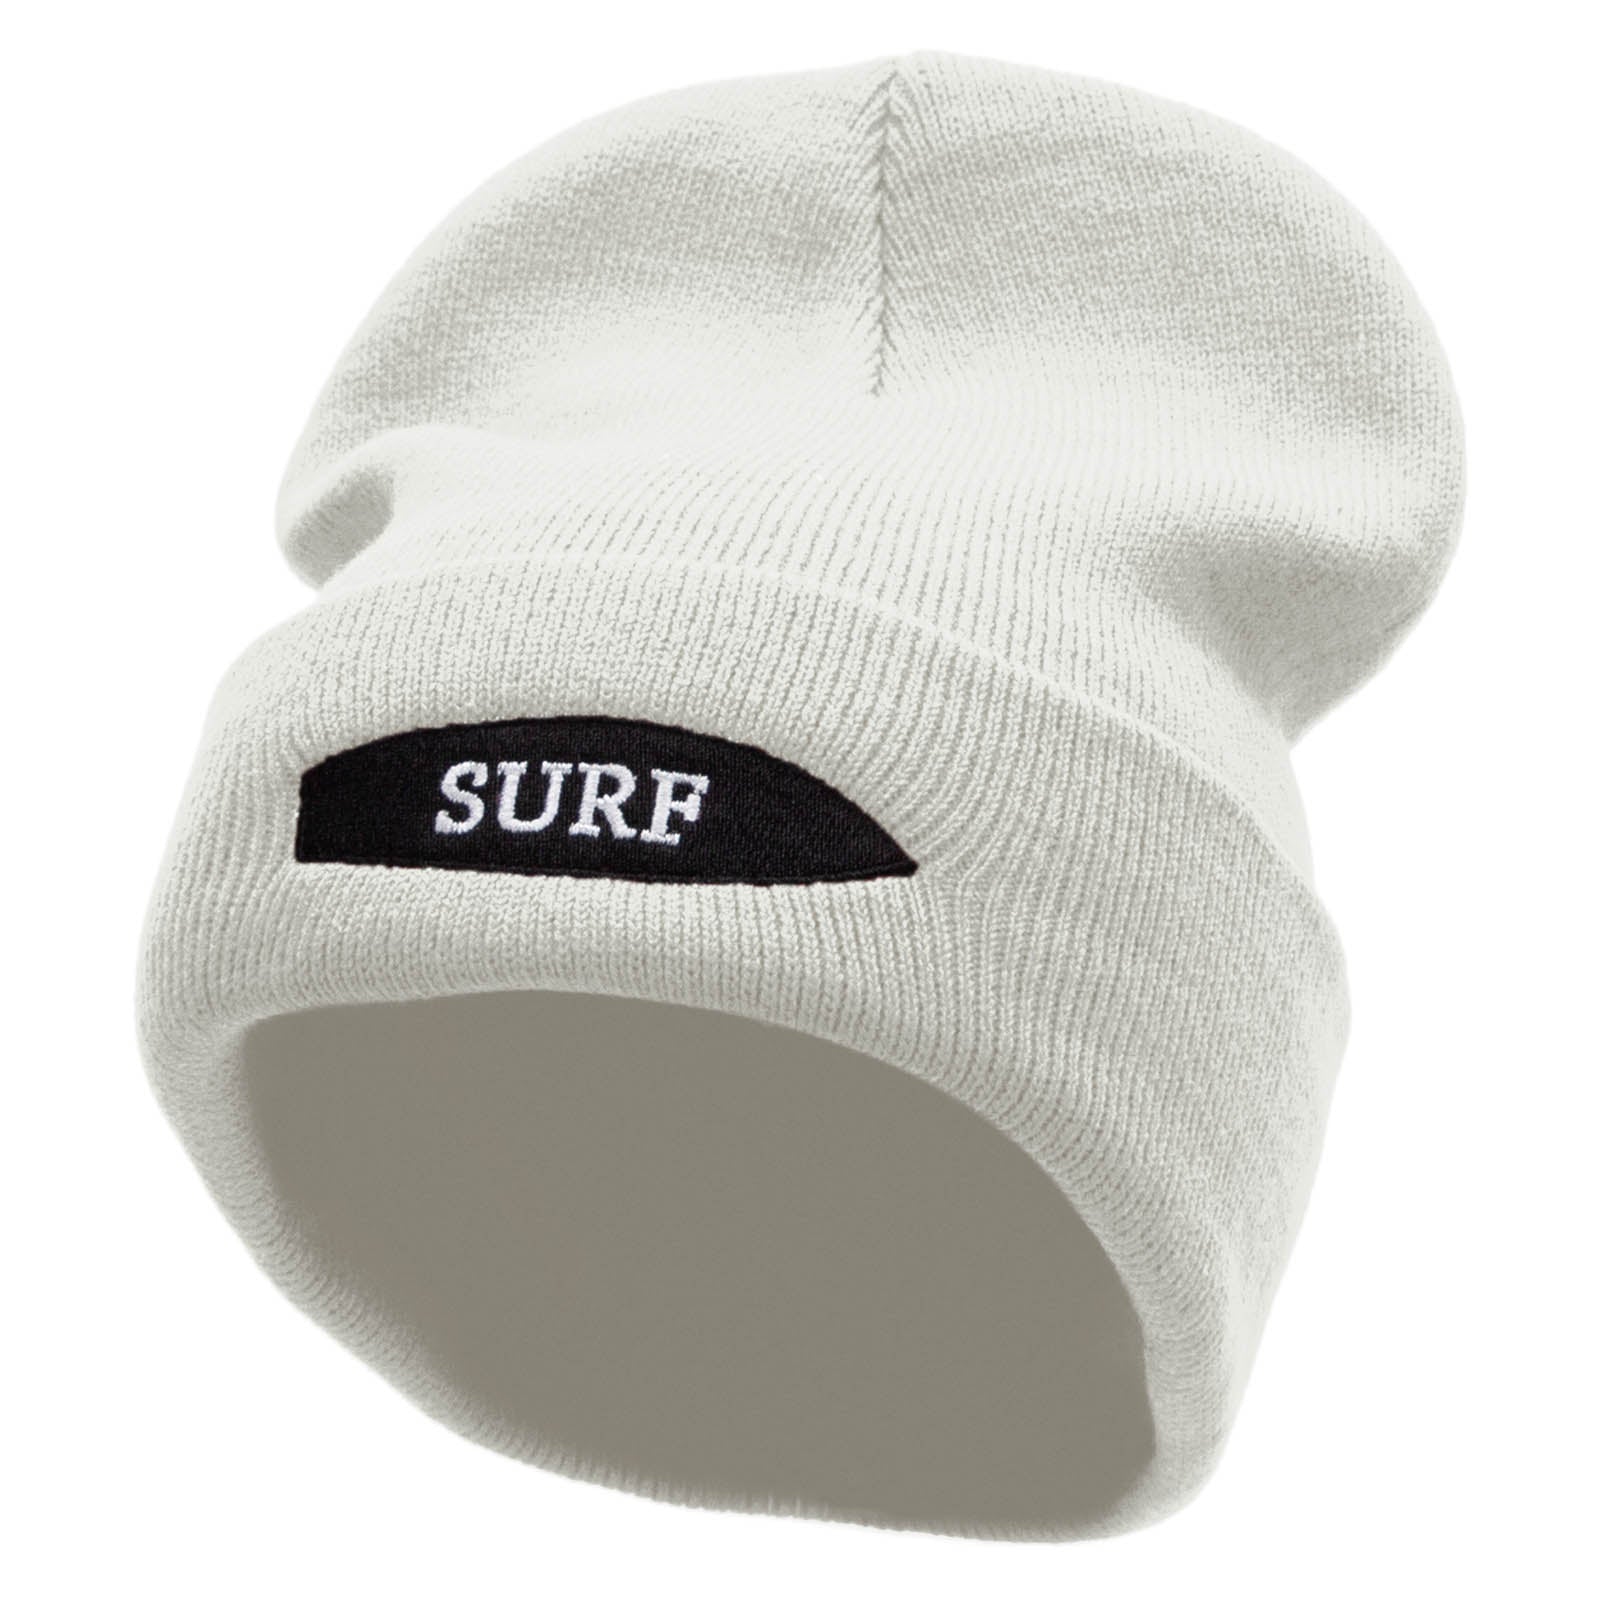 Surfboard Embroidered 12 Inch Long Knitted Beanie - White OSFM